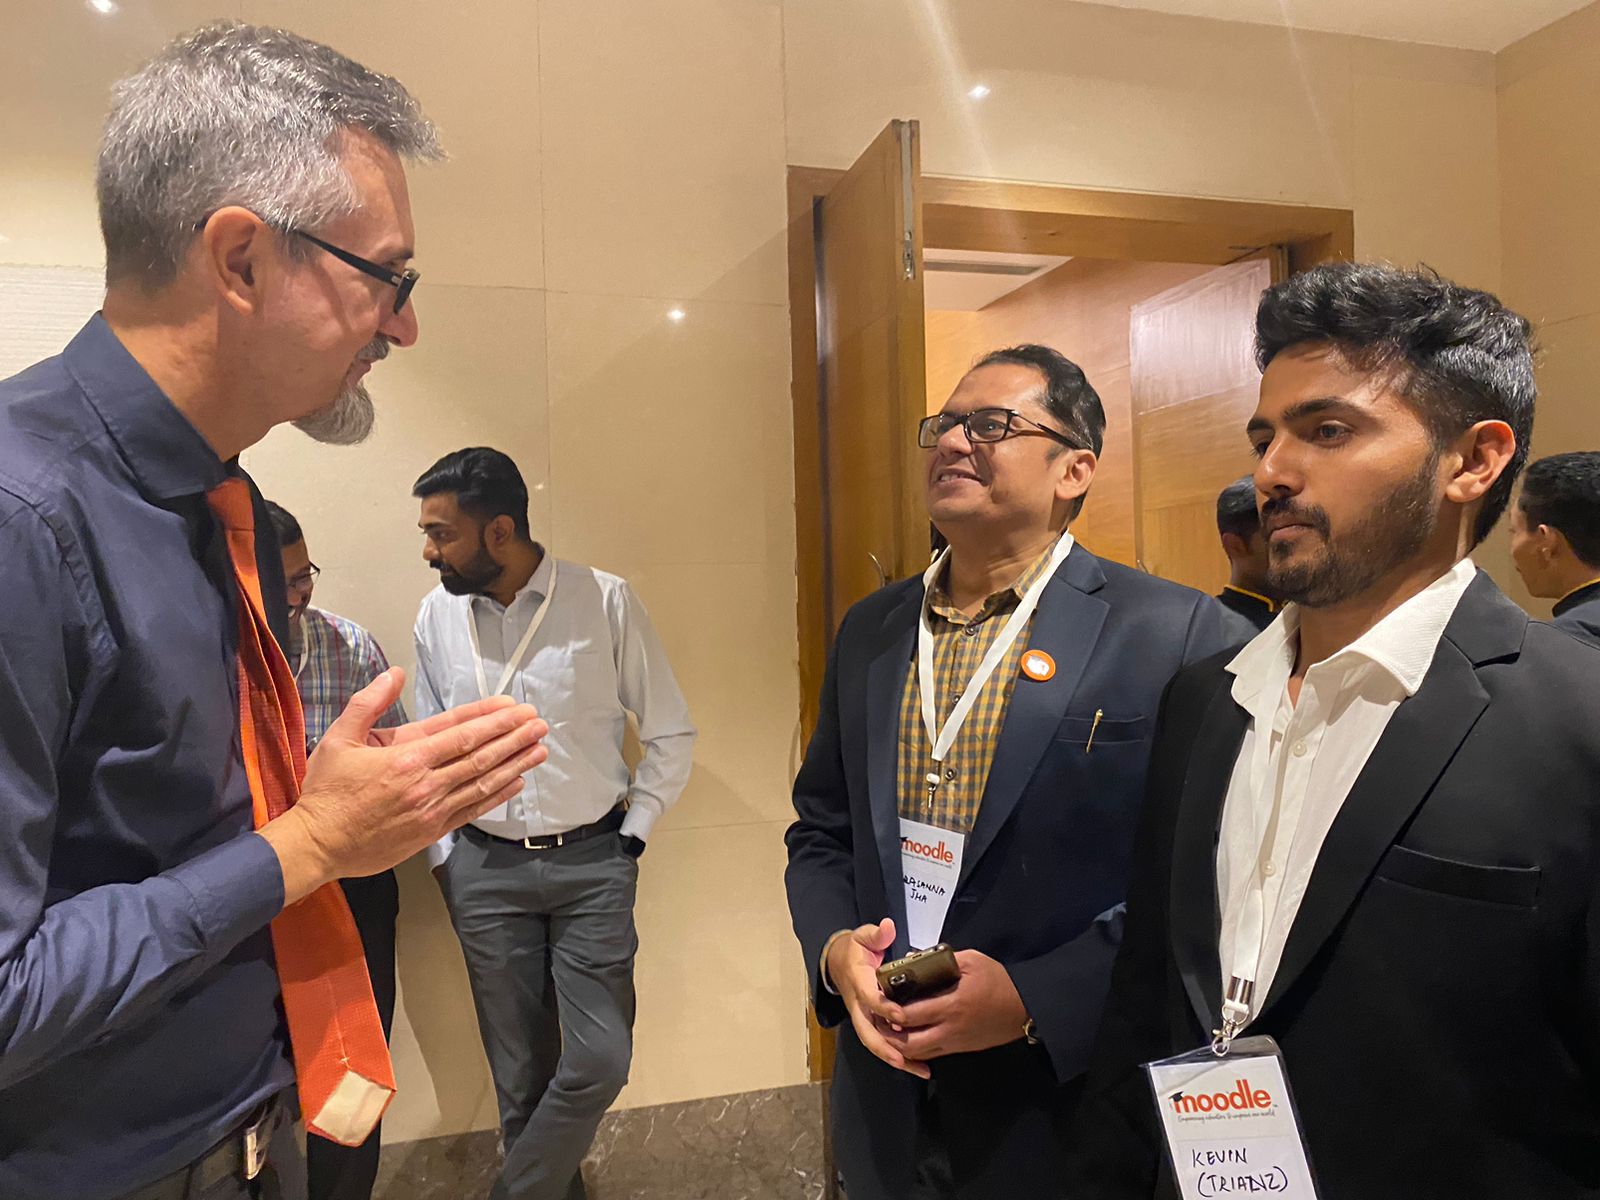 Jhamobi and Moodle India join forces to revolutionize Higher Education, enhancing and transforming the learning experience for students